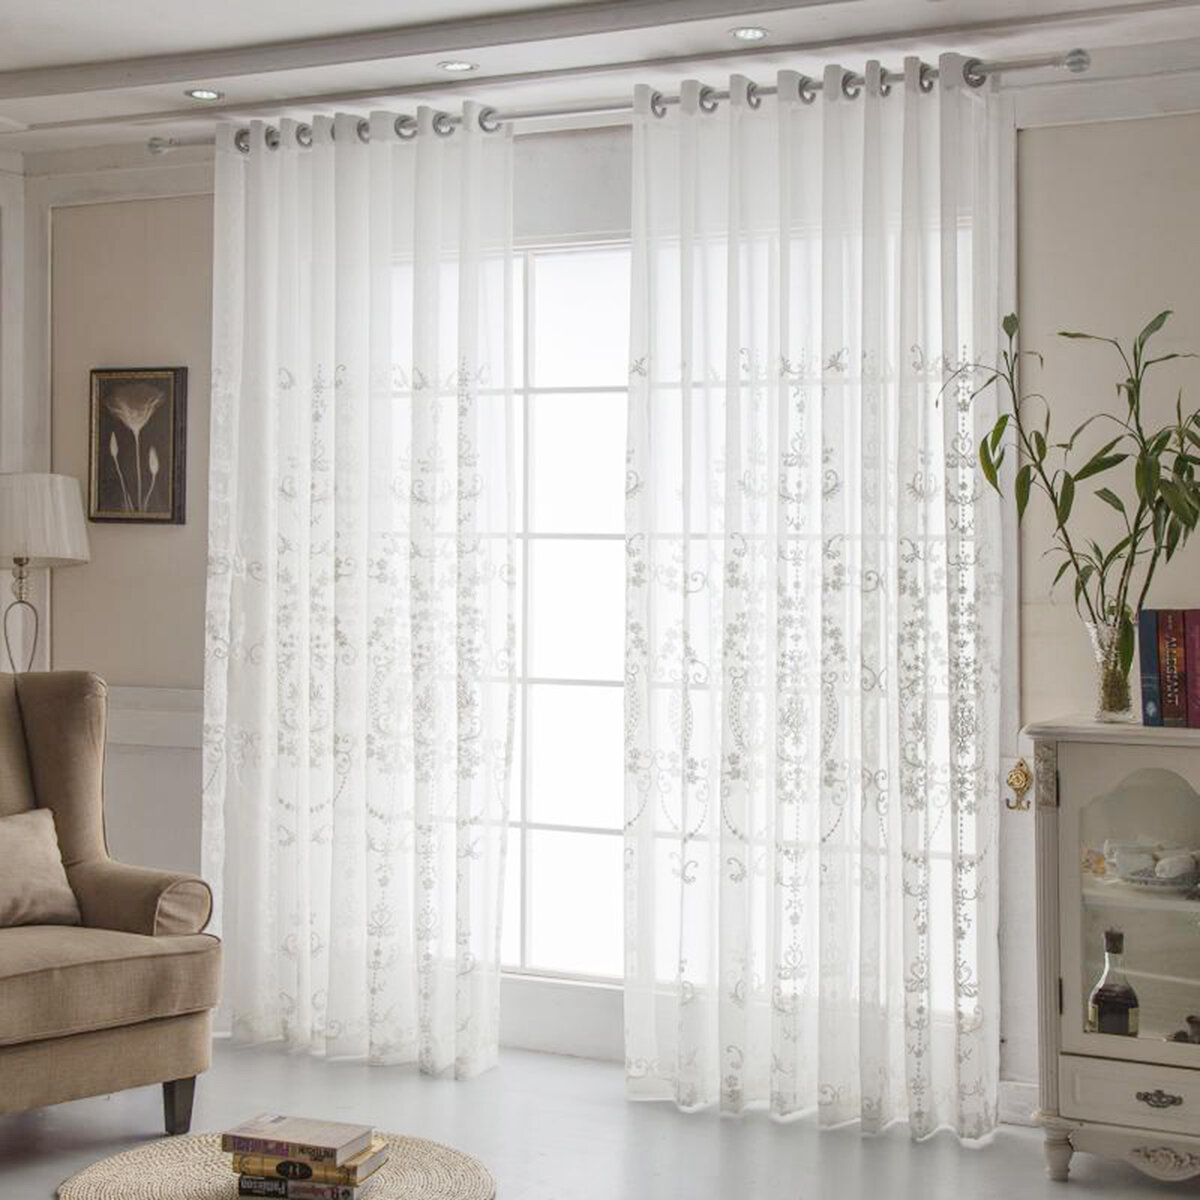 

2PCS White Floral Embroidery Net Curtain Tulle Voile Window Sheer For Living Room Bedroom